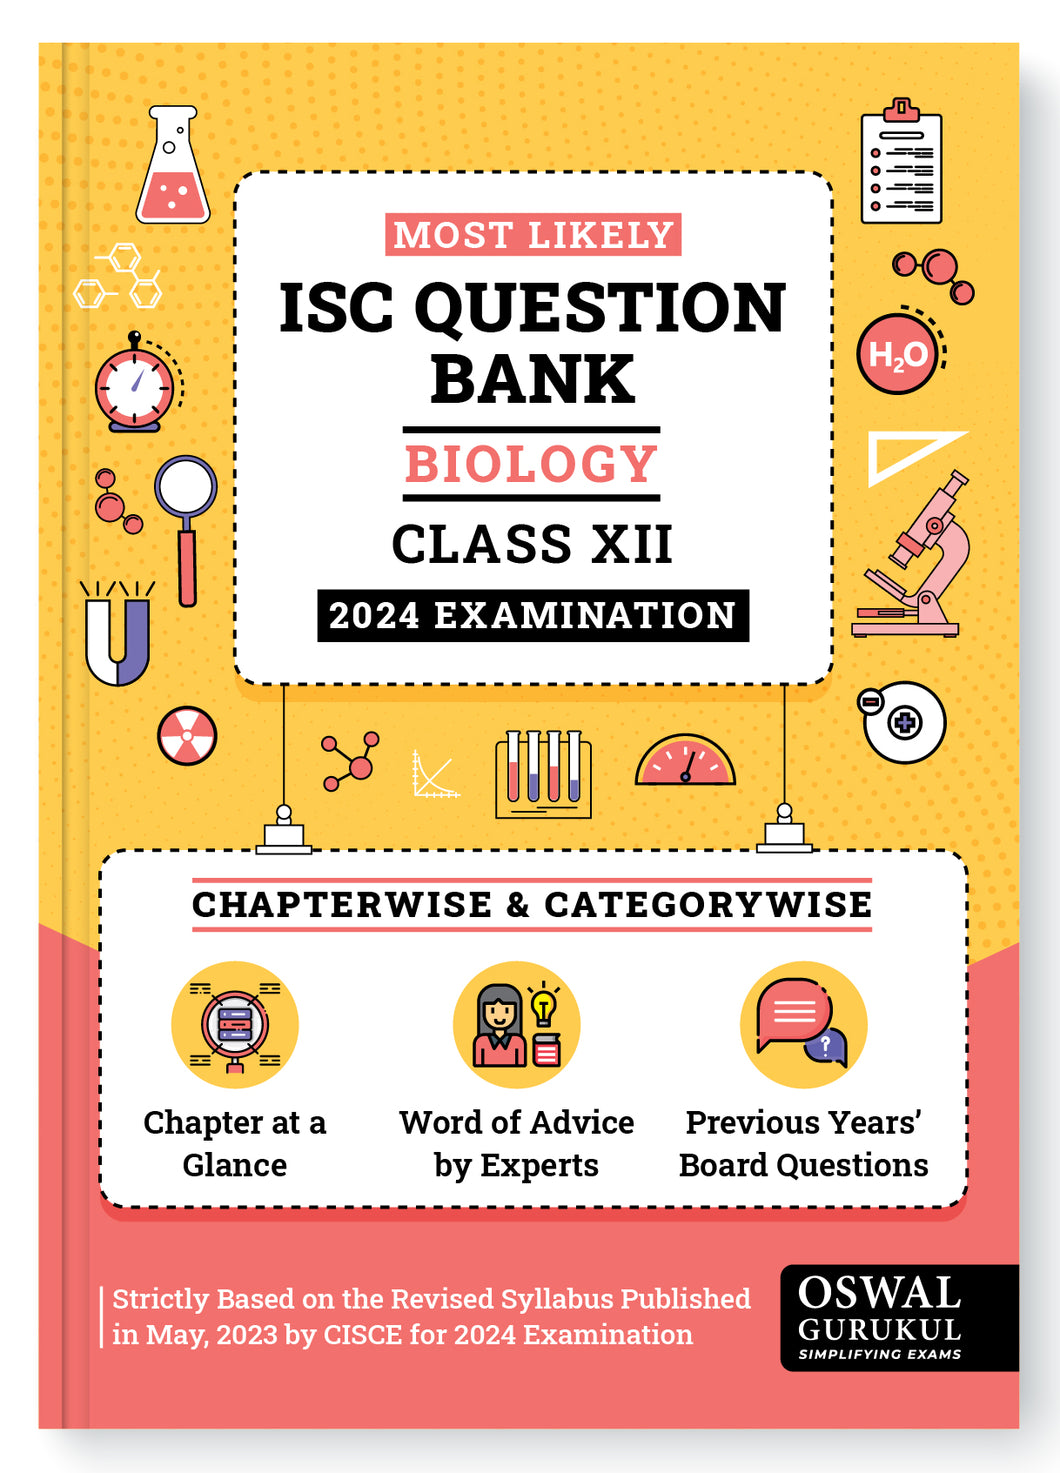 Oswal - Gurukul Biology Most Likely Question Bank : ISC Class 12 for 2024 Exam